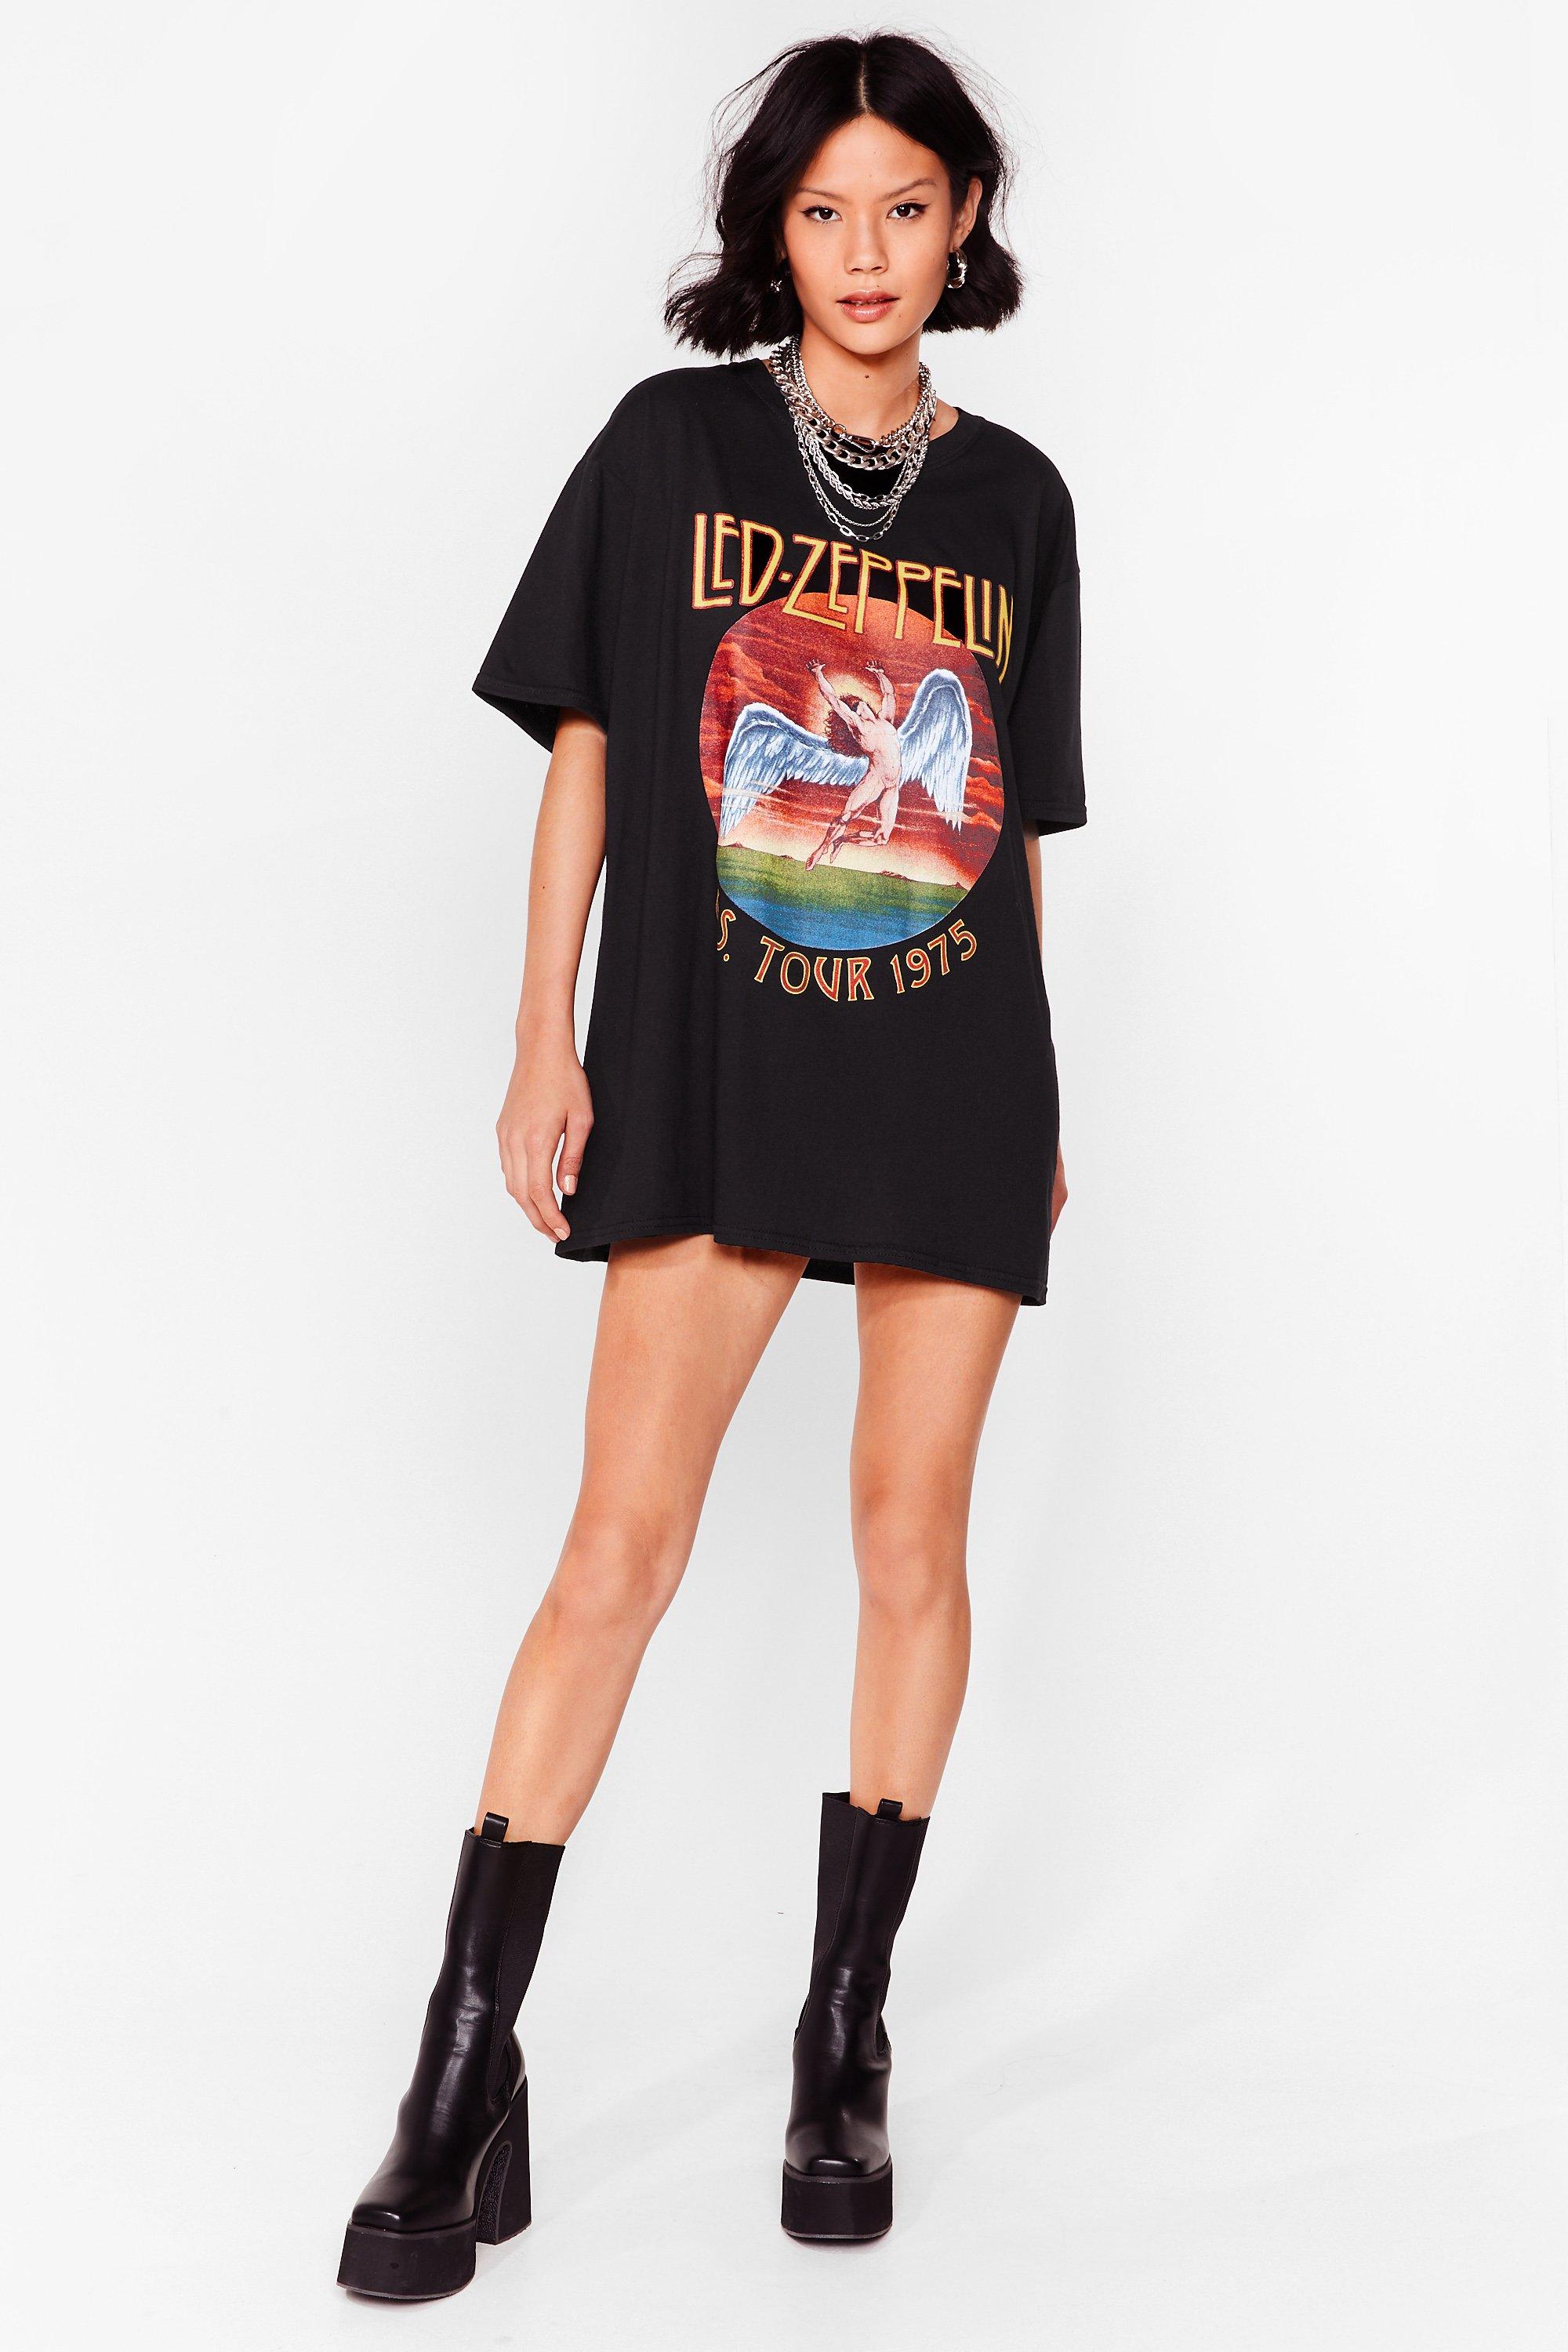 Led Zeppelin Graphic Tee Dress Nasty Gal